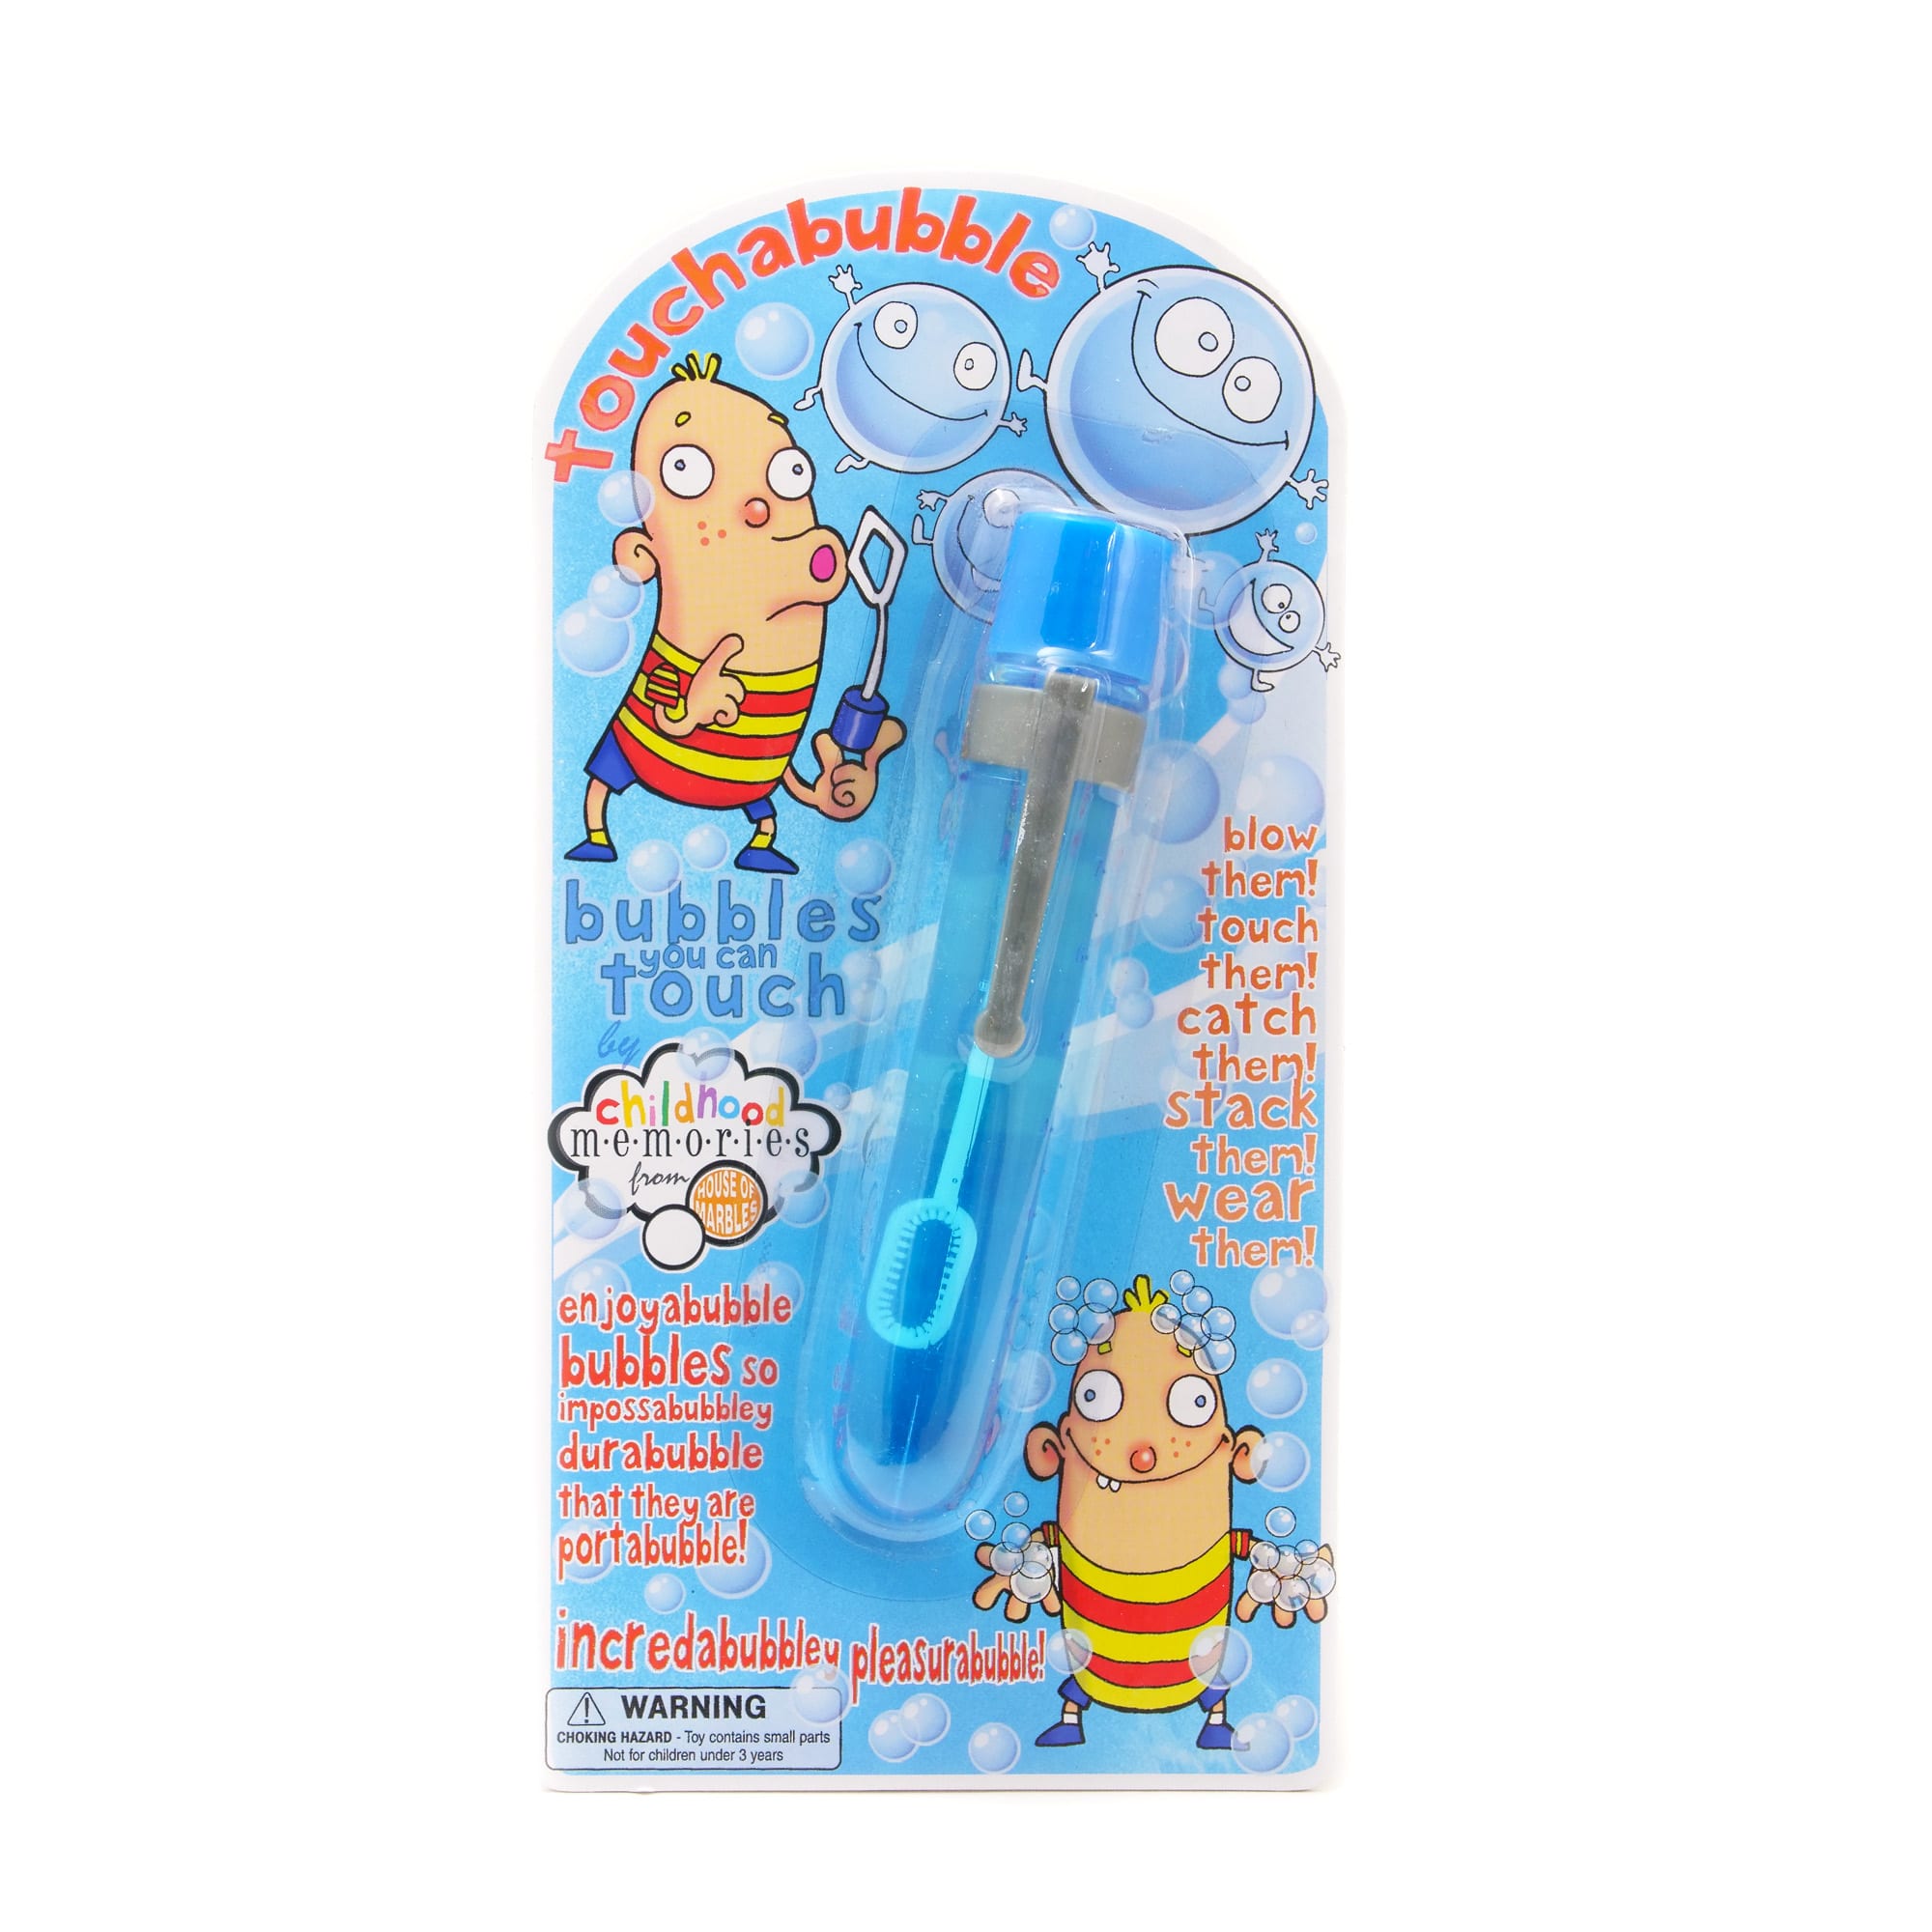 Catch-A-Bubble Pencils Bubbles You Can Catch.Catch And Stack Them 